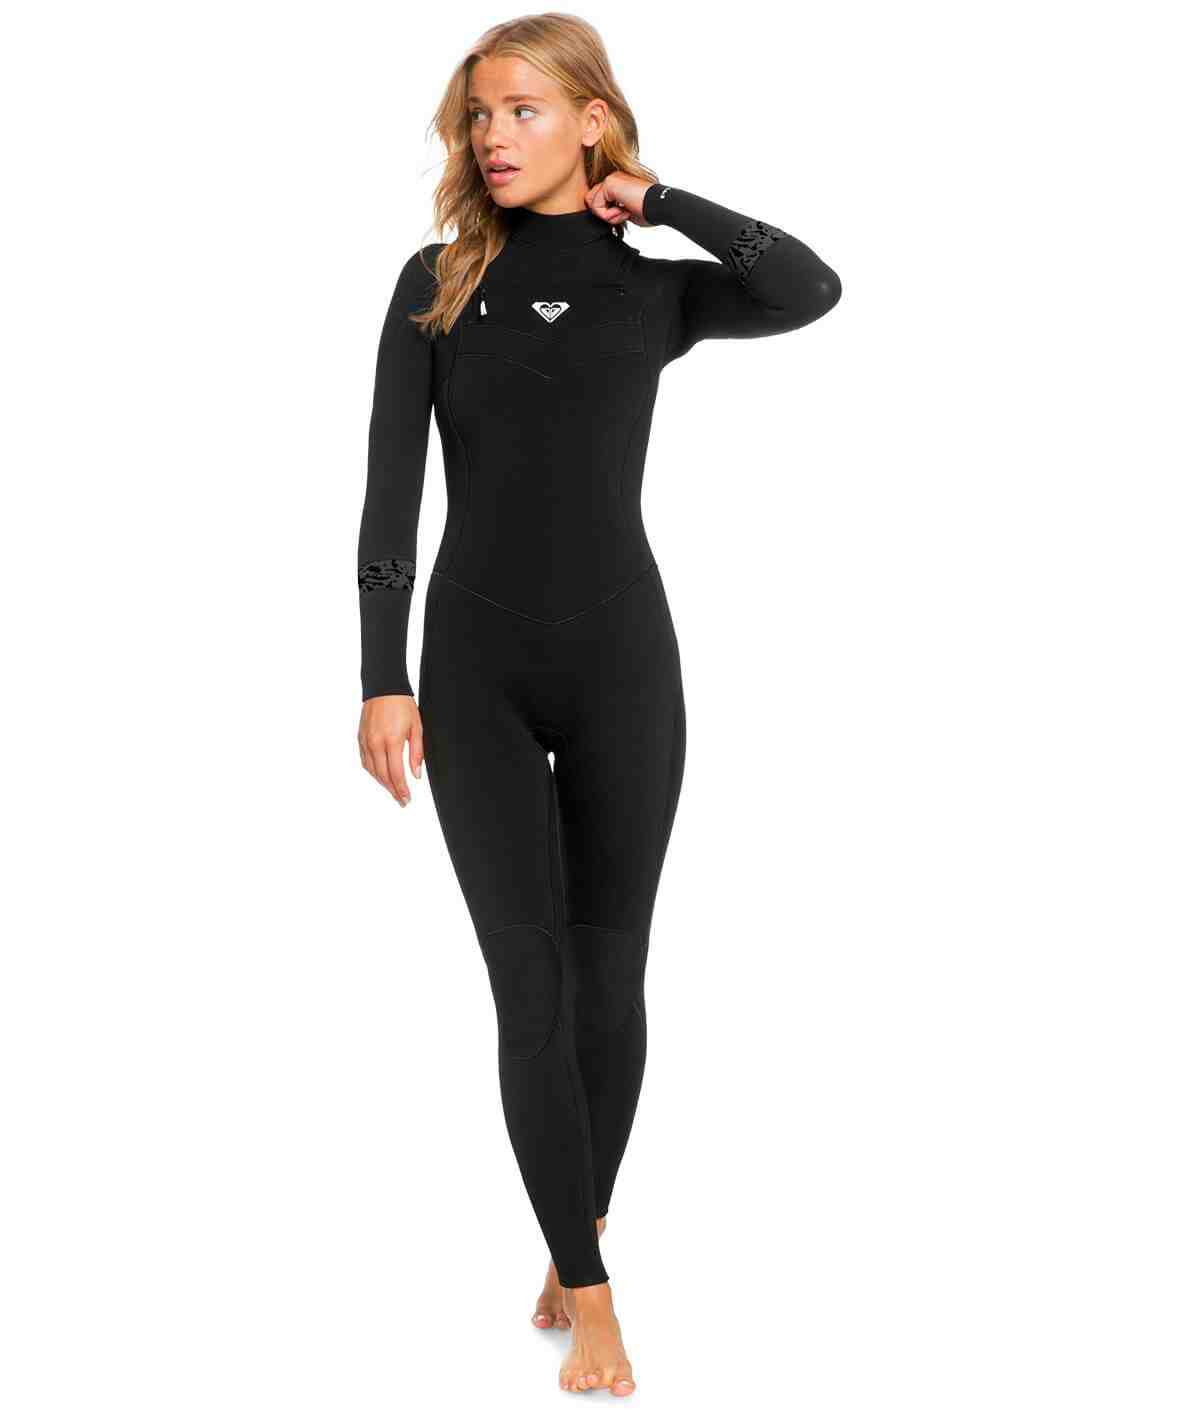 How do you know what size wetsuit to get?